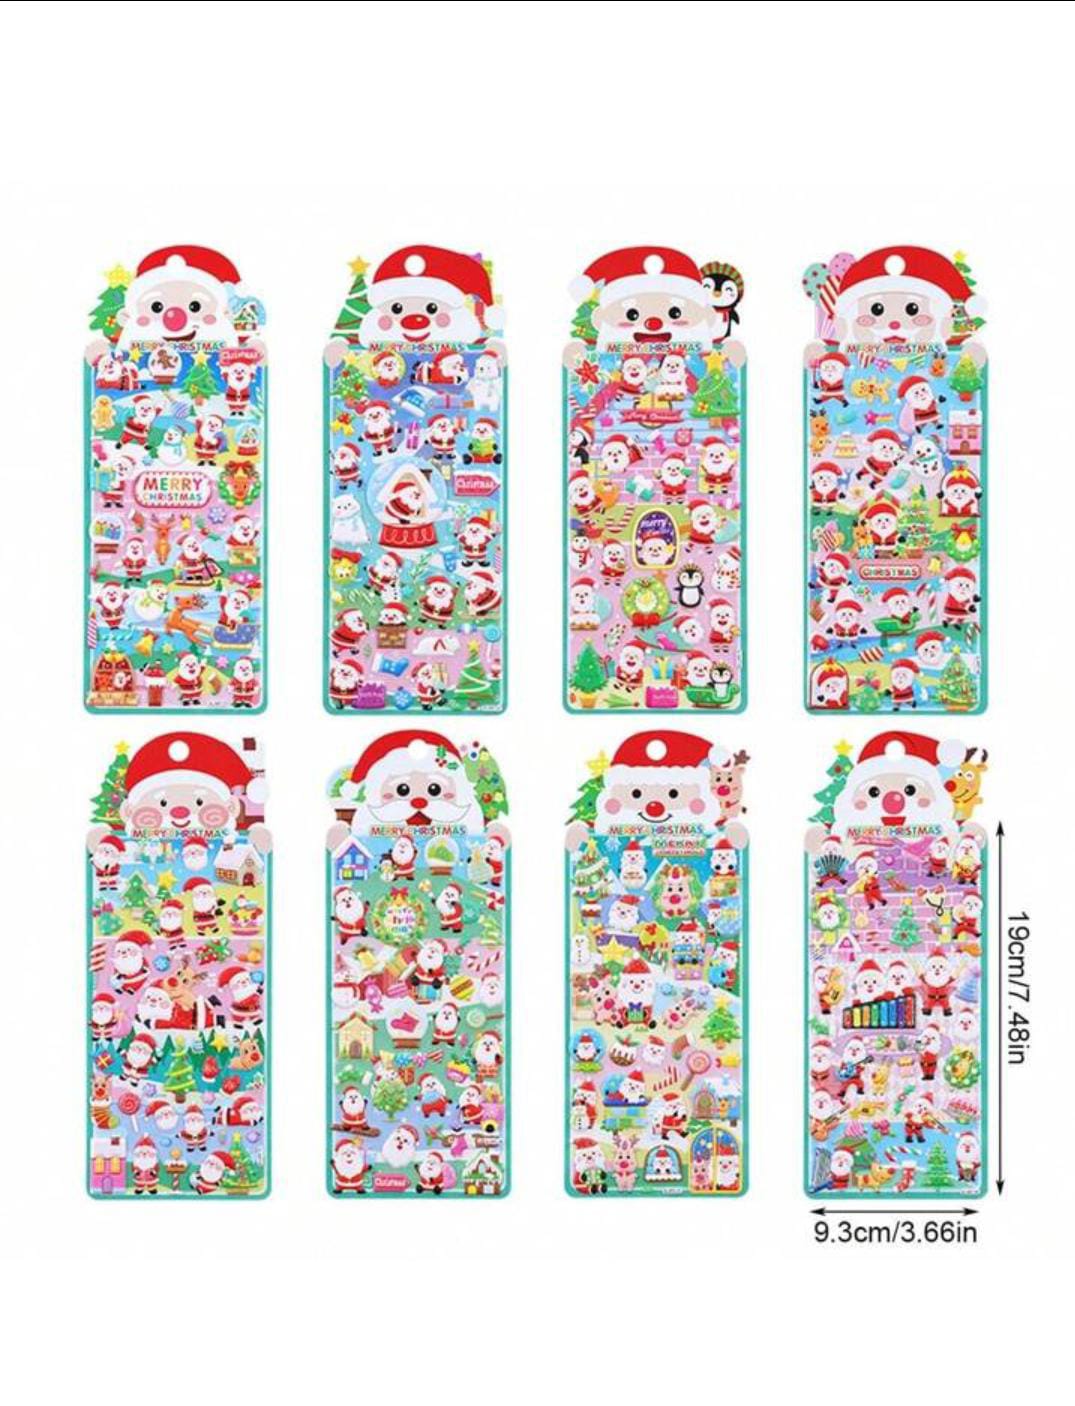 Inkarto Christmas 3D Three-Dimensional Sticker Set - Santa Claus, Christmas Tree, Gift Box, Snowman, Party Decoration for Cups, Mobiles, and Stationery